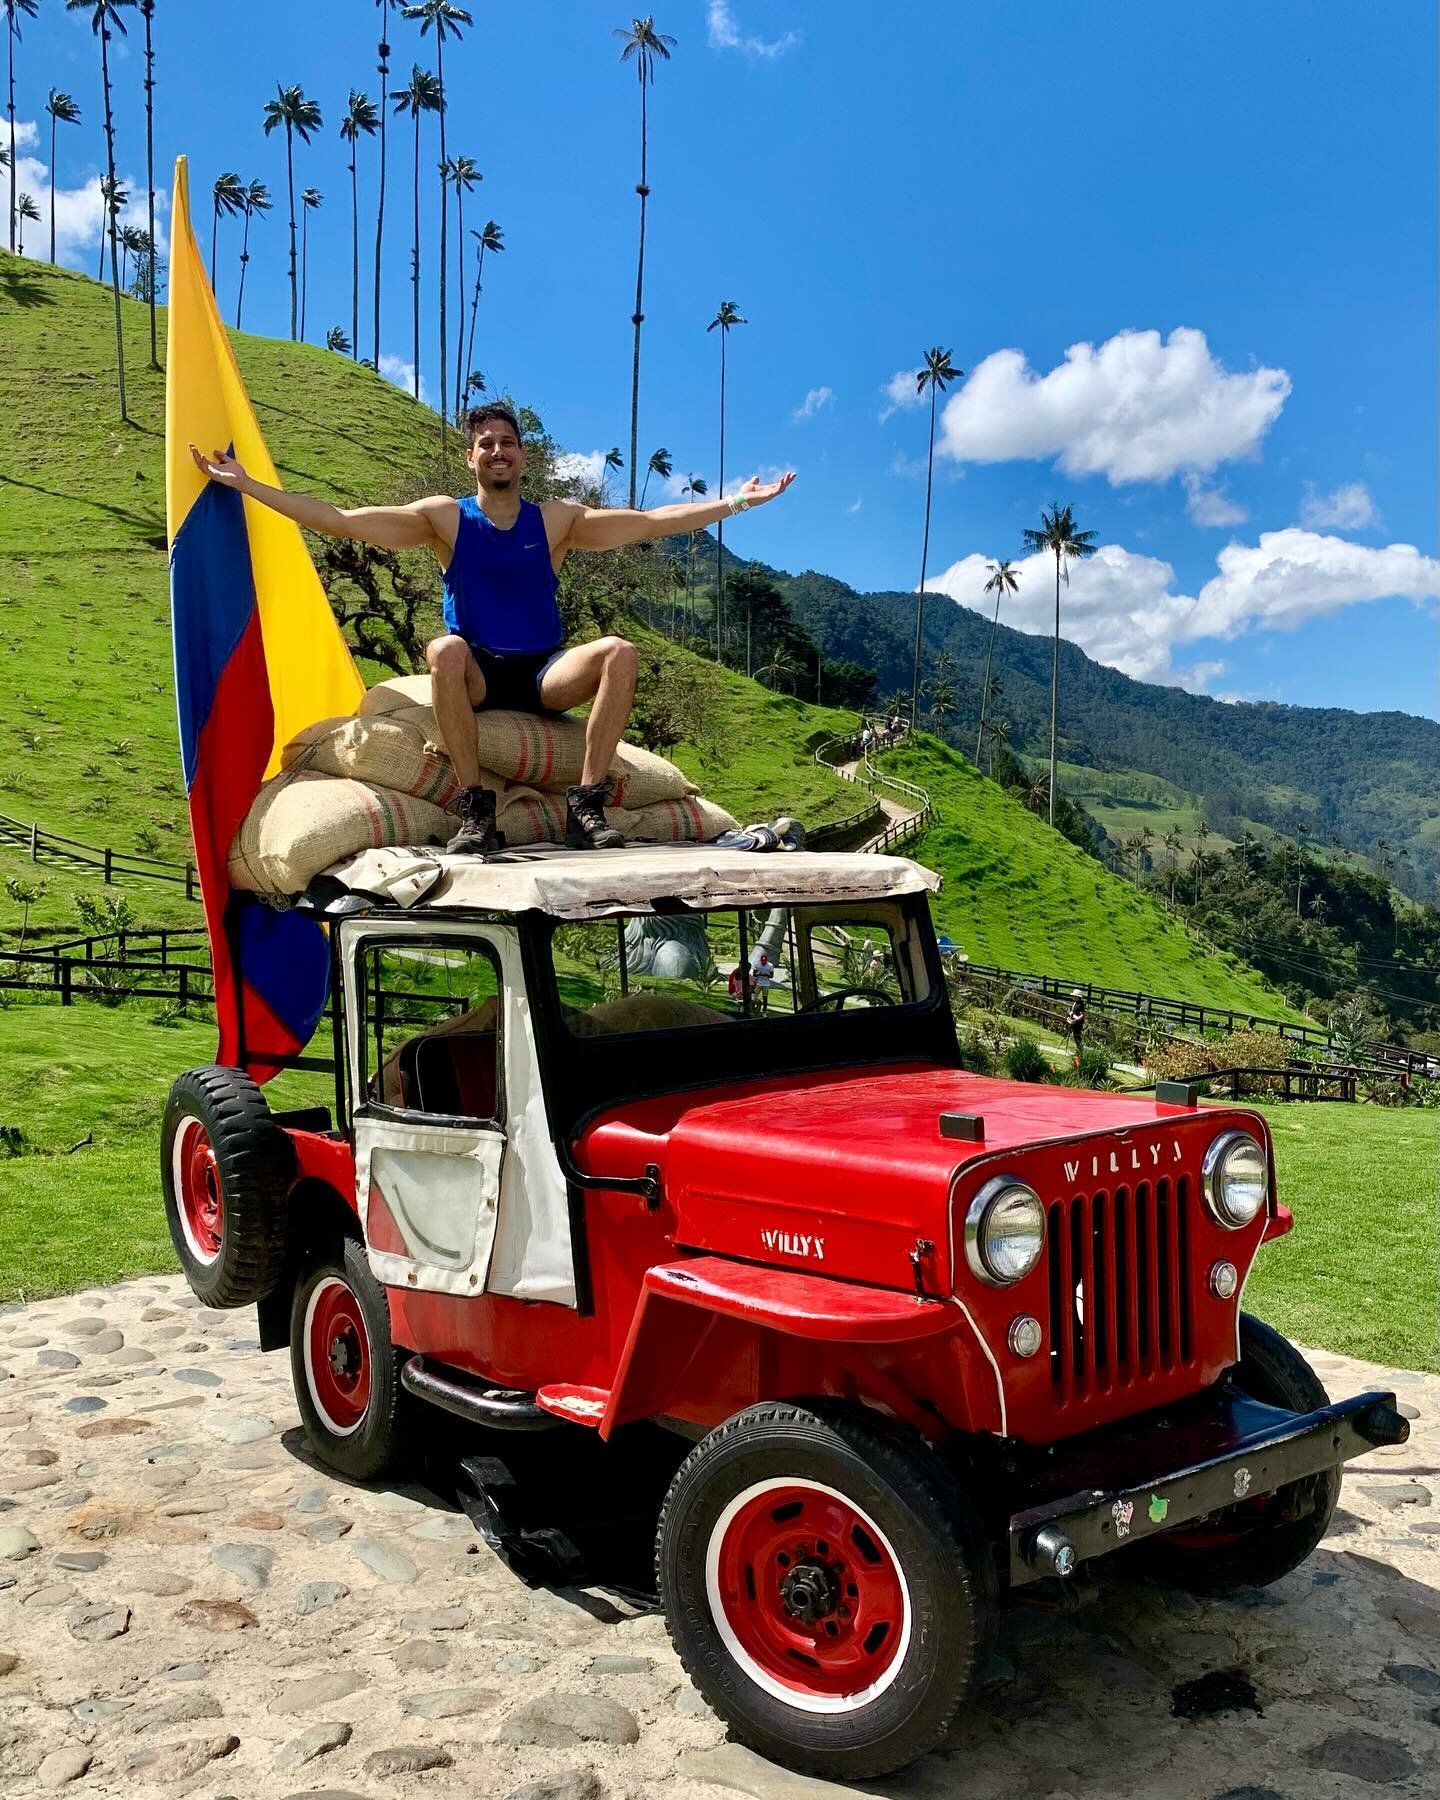 World&rsquo;s tallest palm trees! 🌴

Cocora Valley wax palms can grow up to ~60 meters (~200 feet). This valley sits in a region called the &ldquo;Coffee Axis&rdquo; (Eje Cafetero), which is significant to Colombia's economy (3rd largest coffee prod